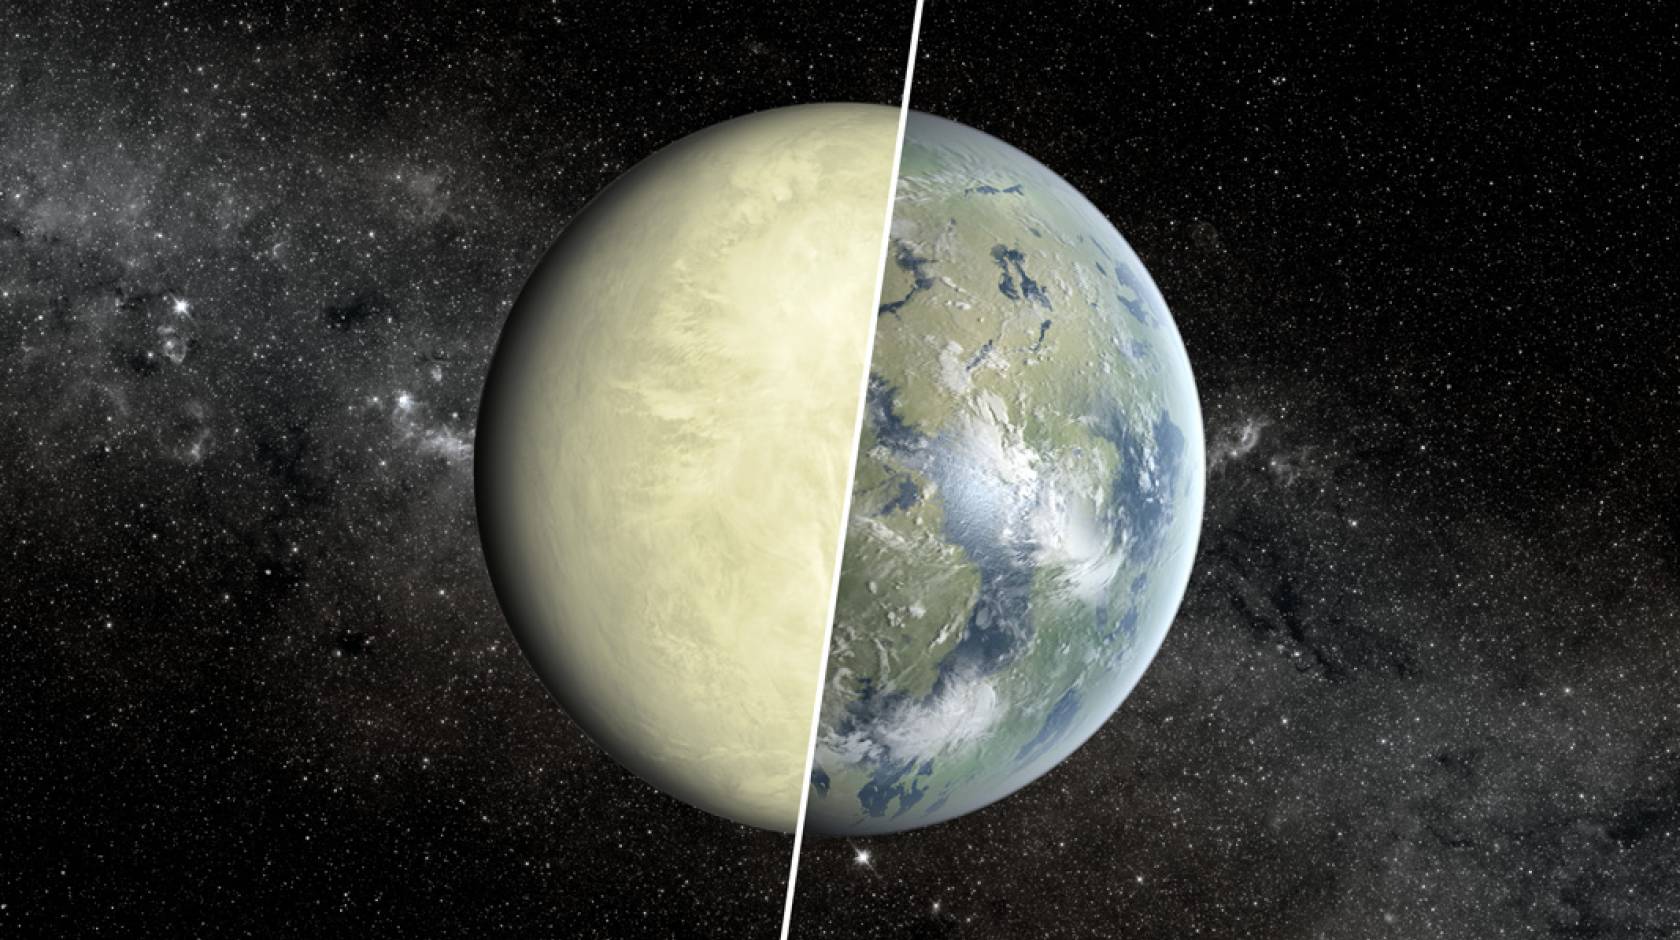 Illustration shows a Super Venus planet on the left and a Super Earth on the right.